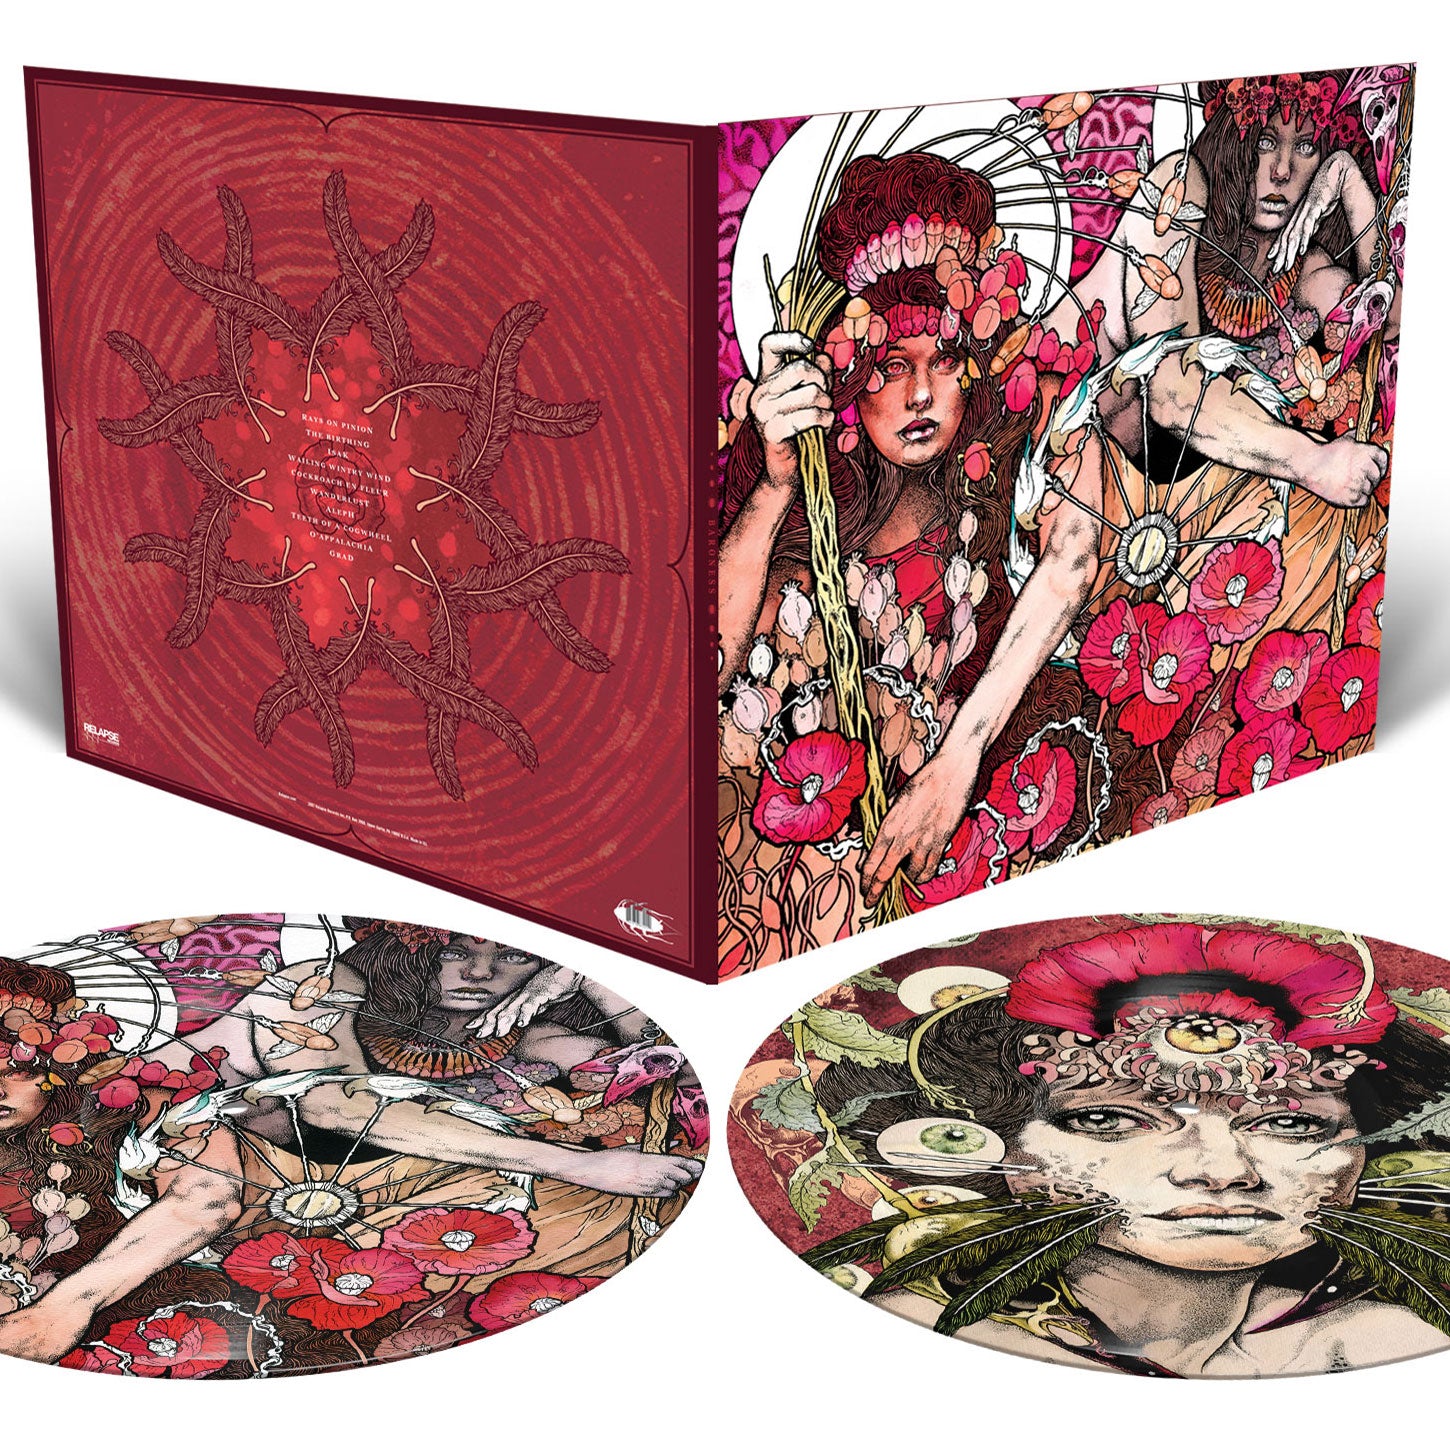 BARONESS - Red Album - 2LP – Limited Picture Disc